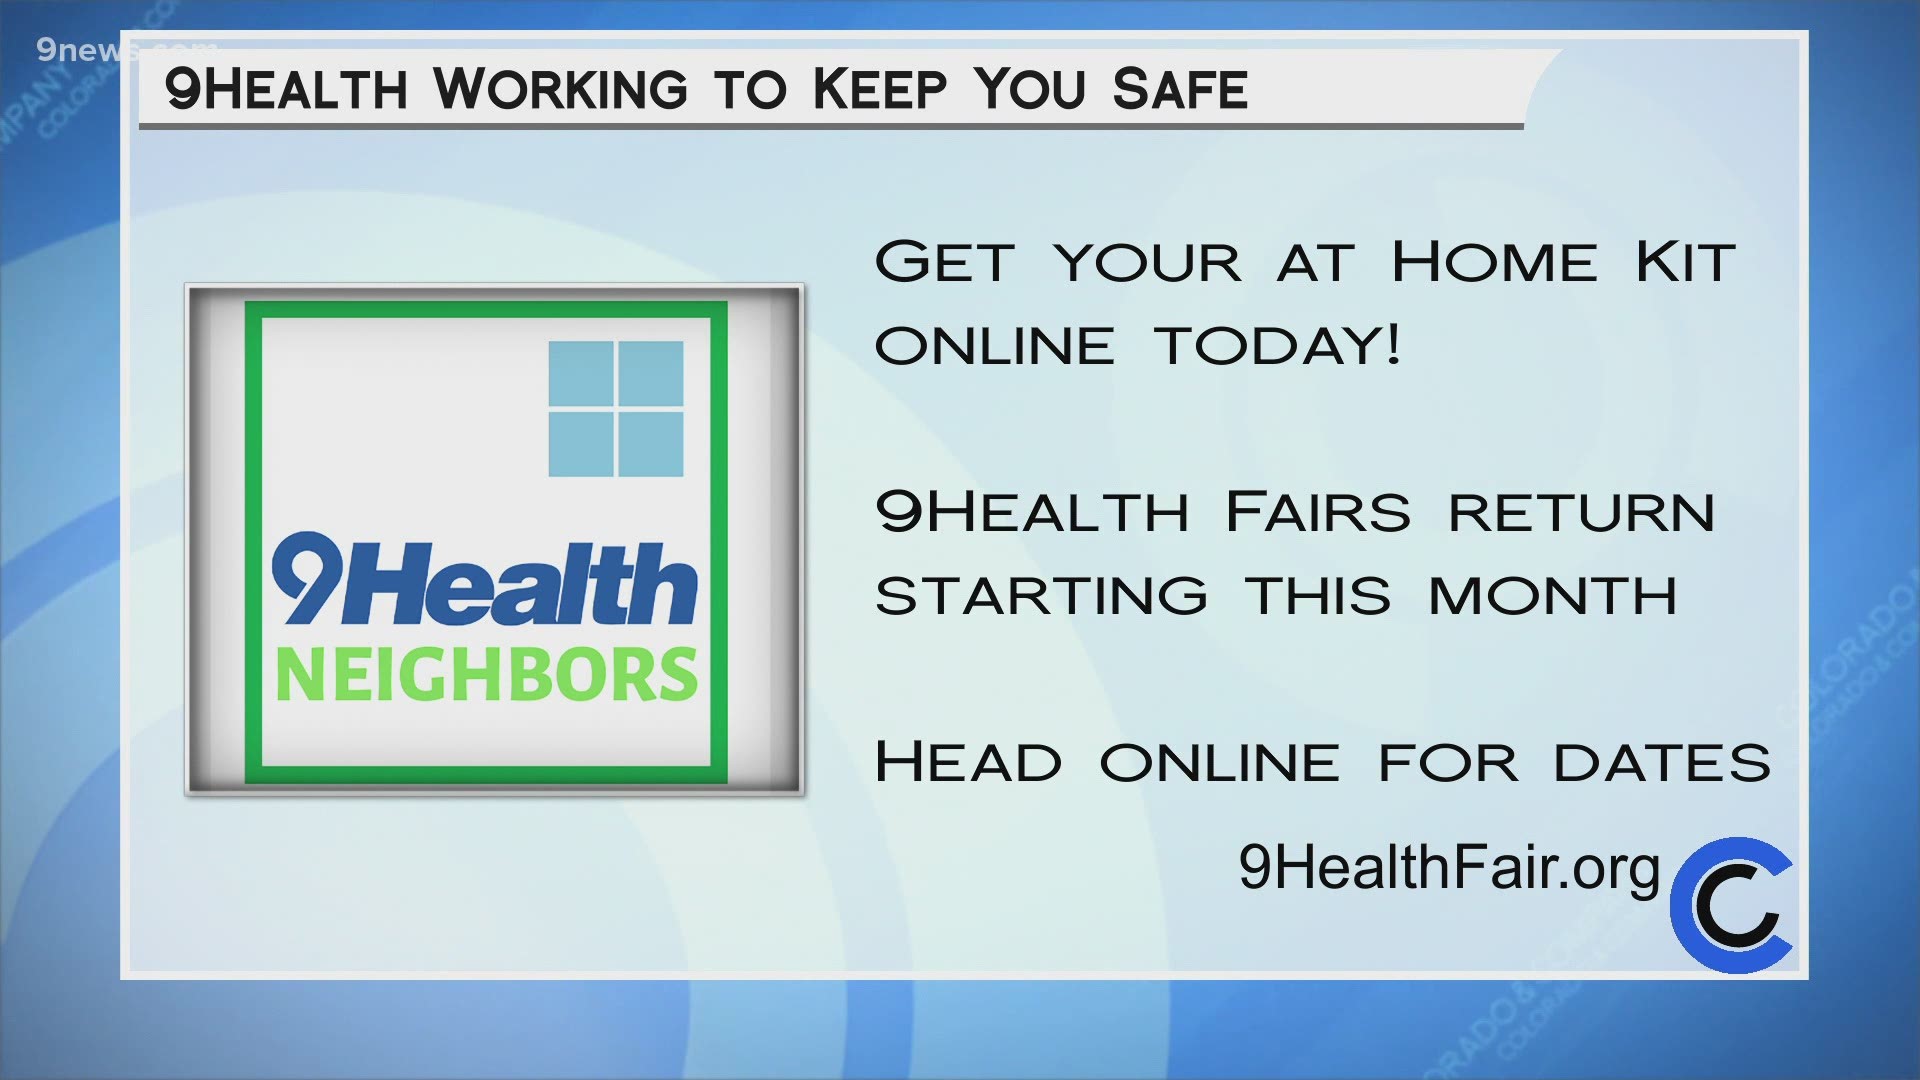 Check out 9HealthFair.org to sign up for your screening today. You can also call 9Health Neighbors with any questions at 303.698.4455 EXT 2005.